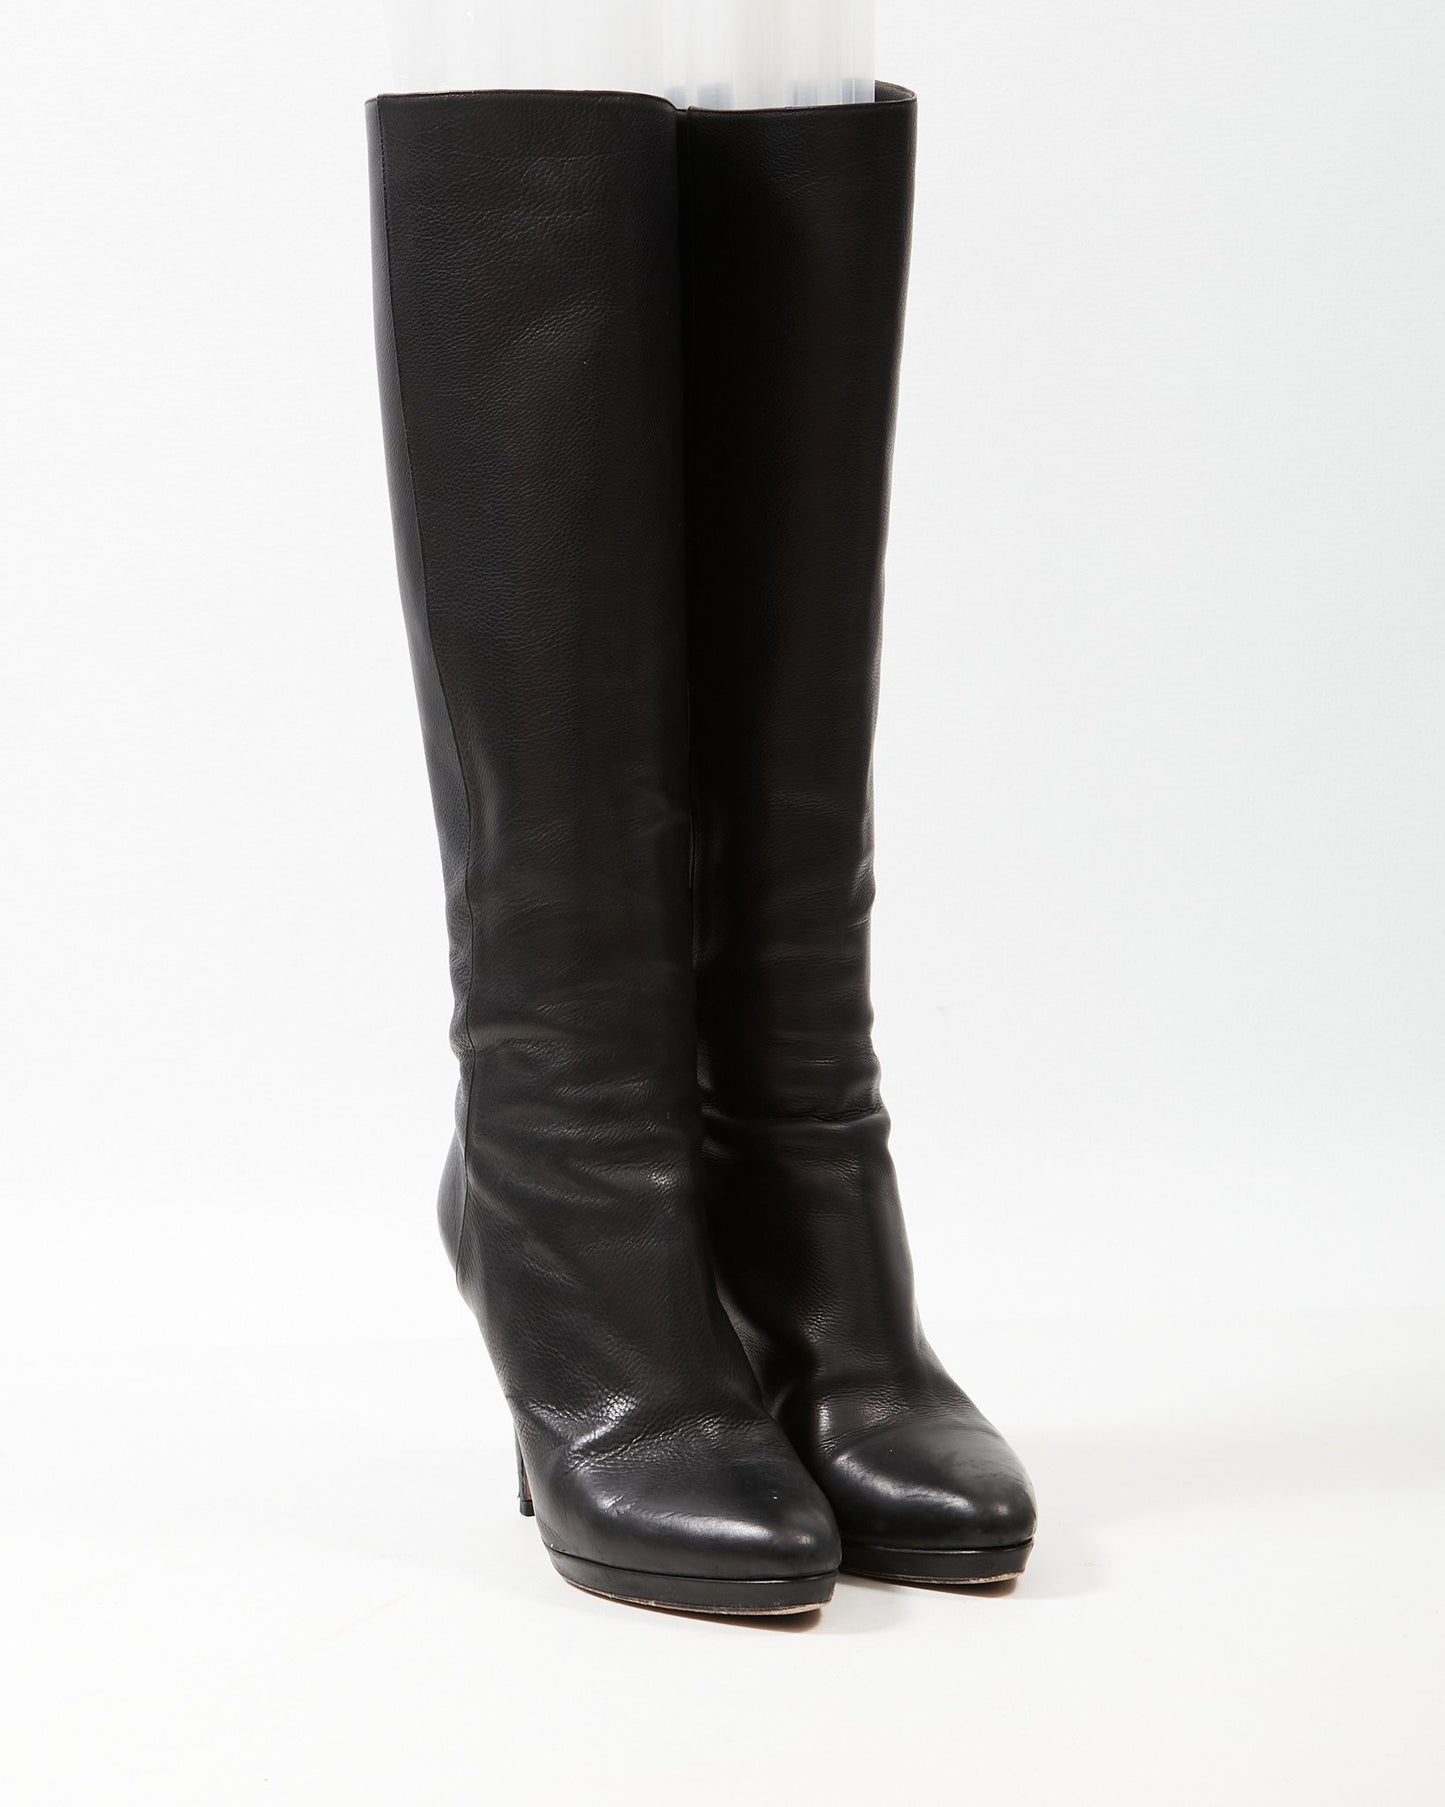 Jimmy Choo Black Leather Knee-High Stiletto Boots - 39